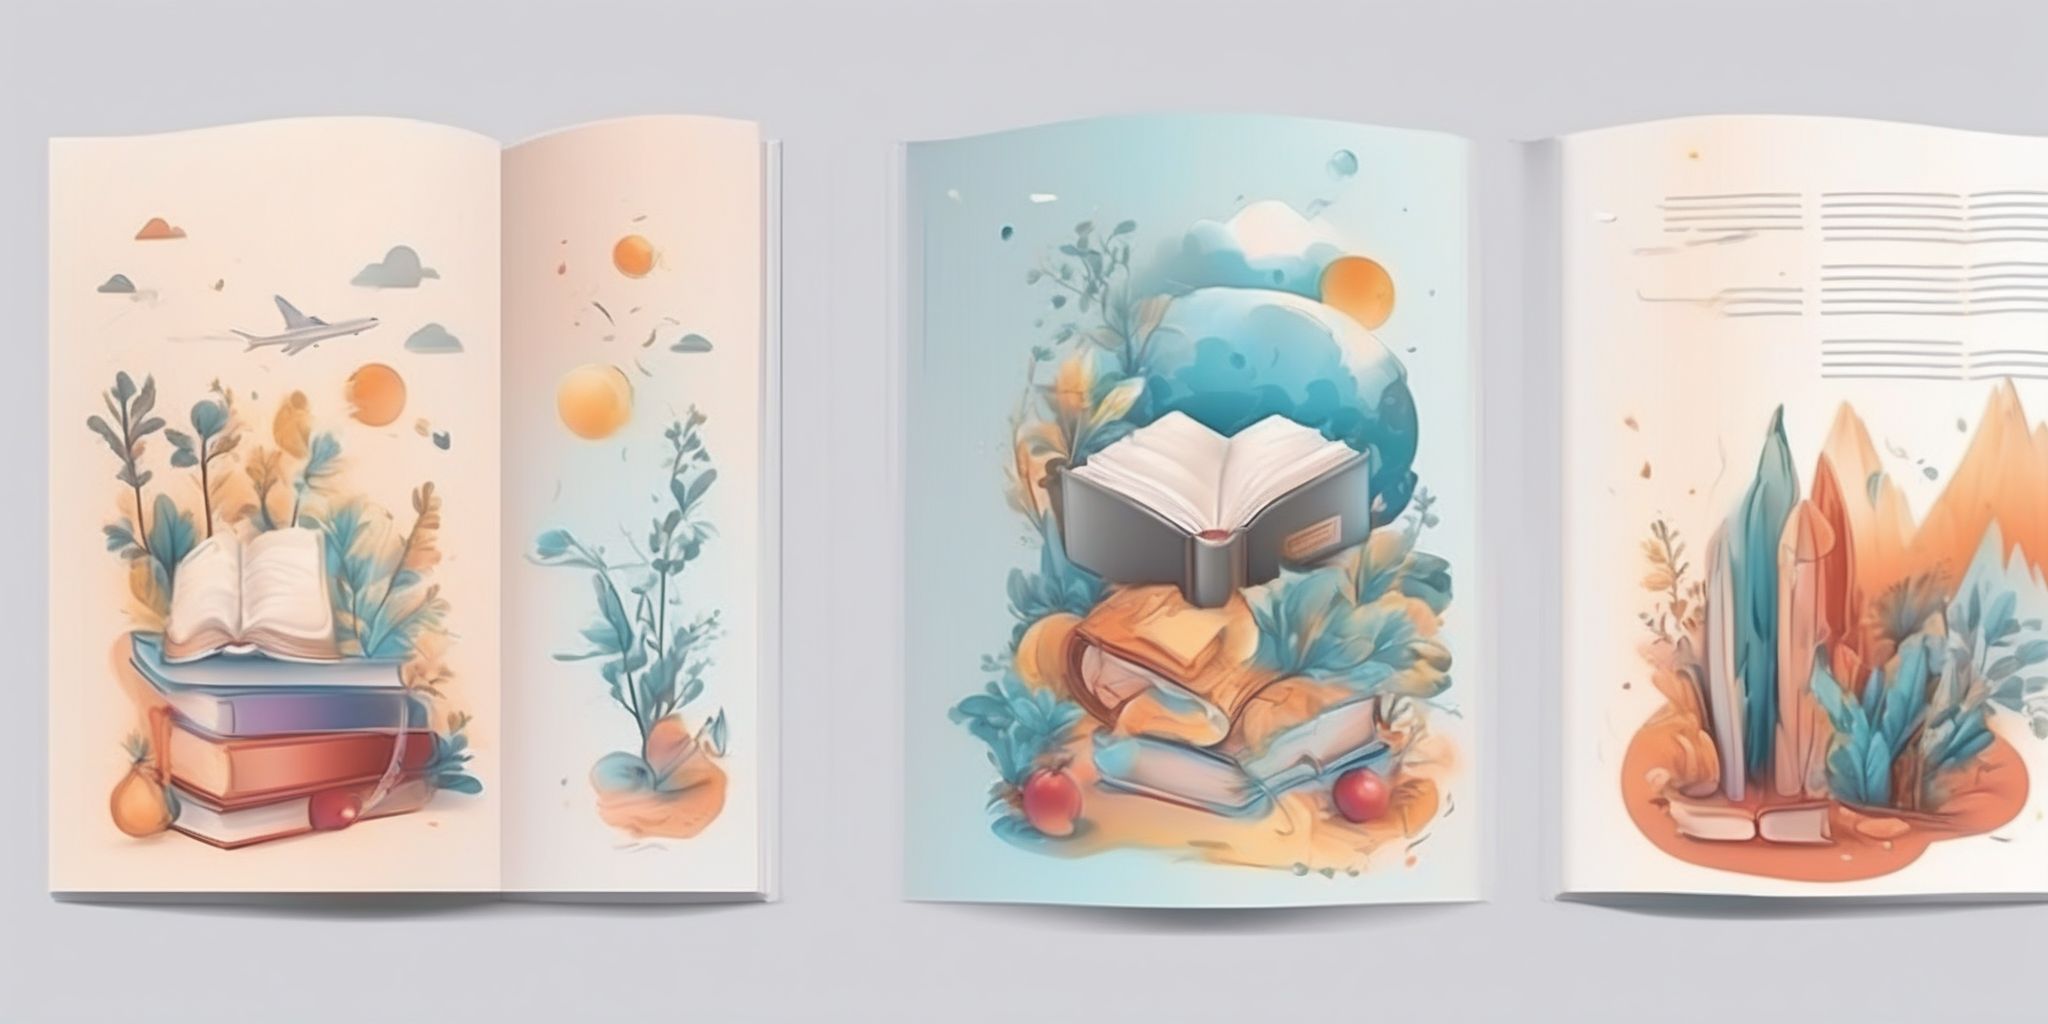 Guide book in illustration style with gradients and white background